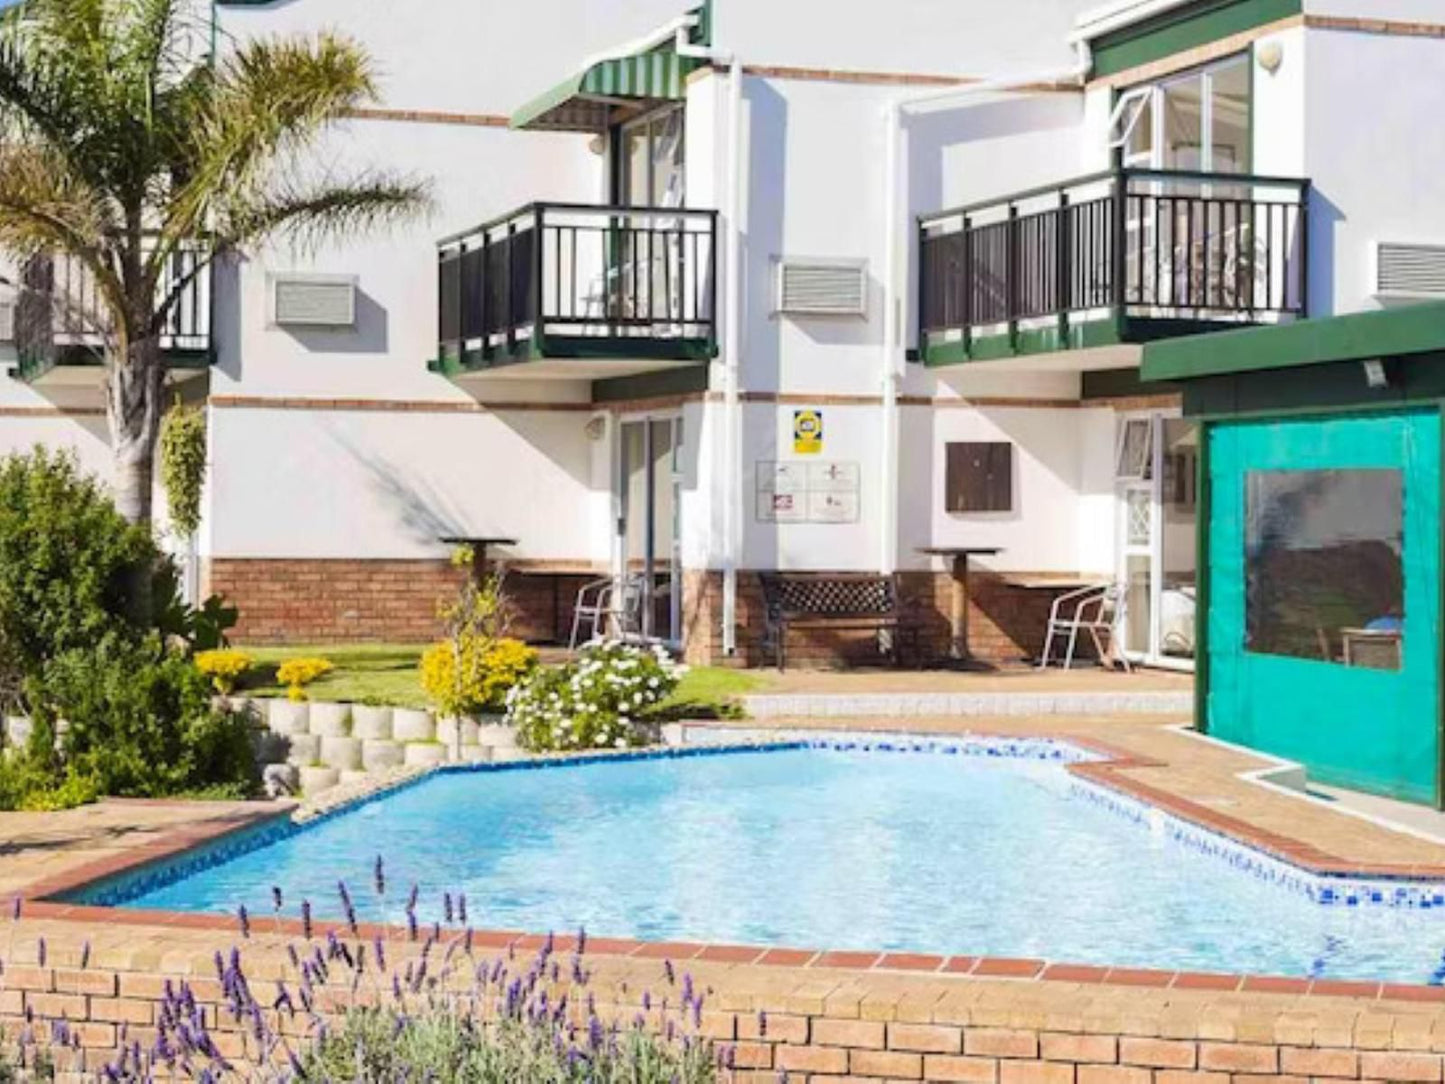 Chapman Hotel And Conference Centre Humewood Port Elizabeth Eastern Cape South Africa Complementary Colors, House, Building, Architecture, Swimming Pool